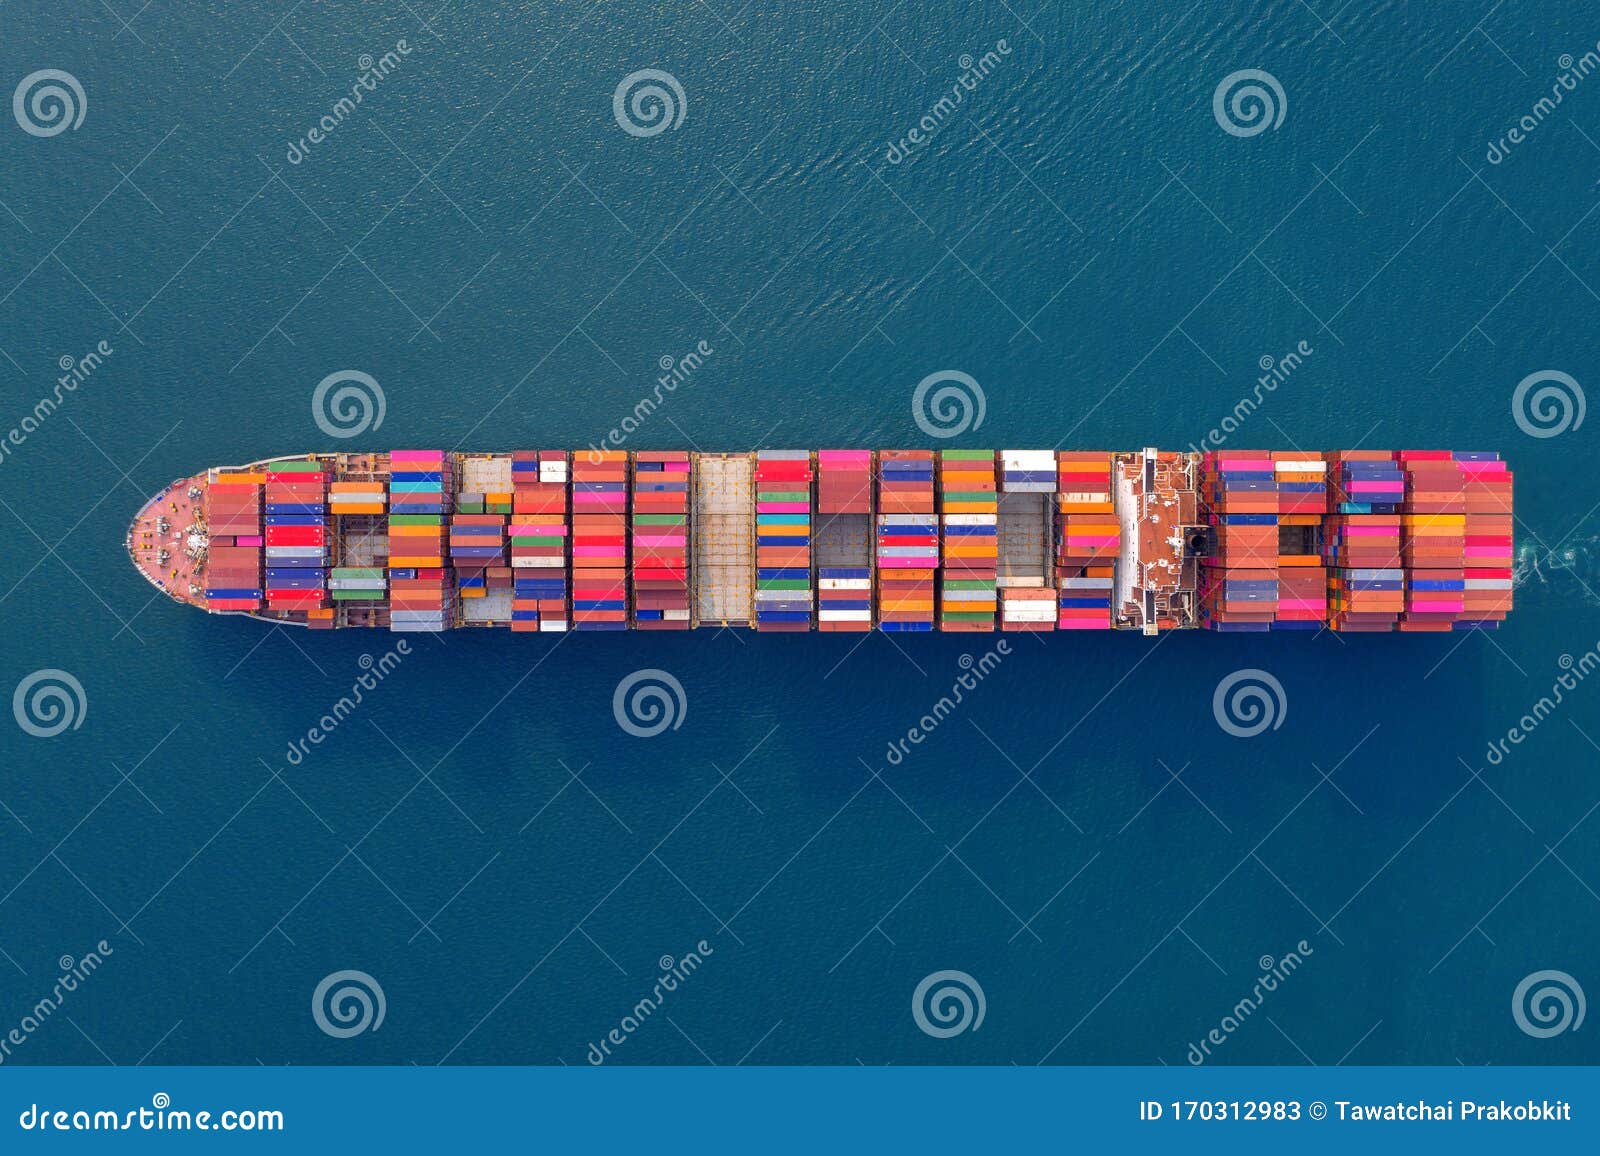 aerial view of container cargo ship in sea.